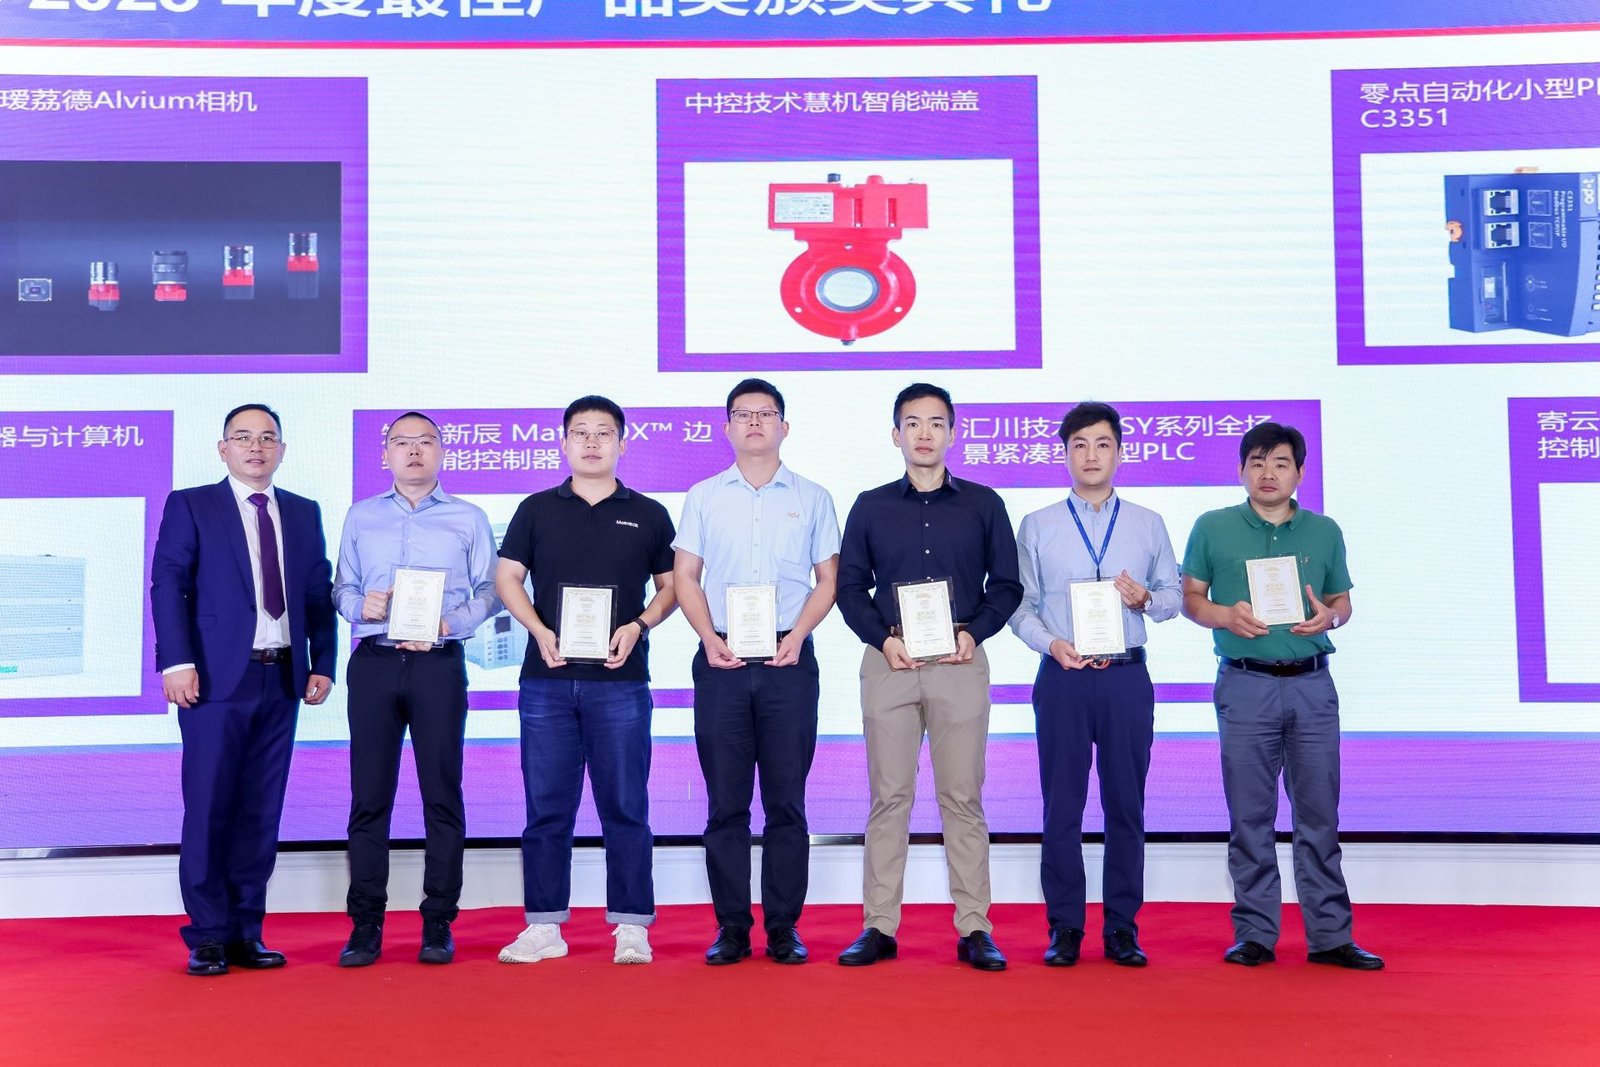 [Translate to Chinese:] At the Control Engineering China Editor's Choice of the Year 2023 Ceremony Tom Huang, General Manager APAC at Allied Vision, receives the award for Allied Vision (third from the right).